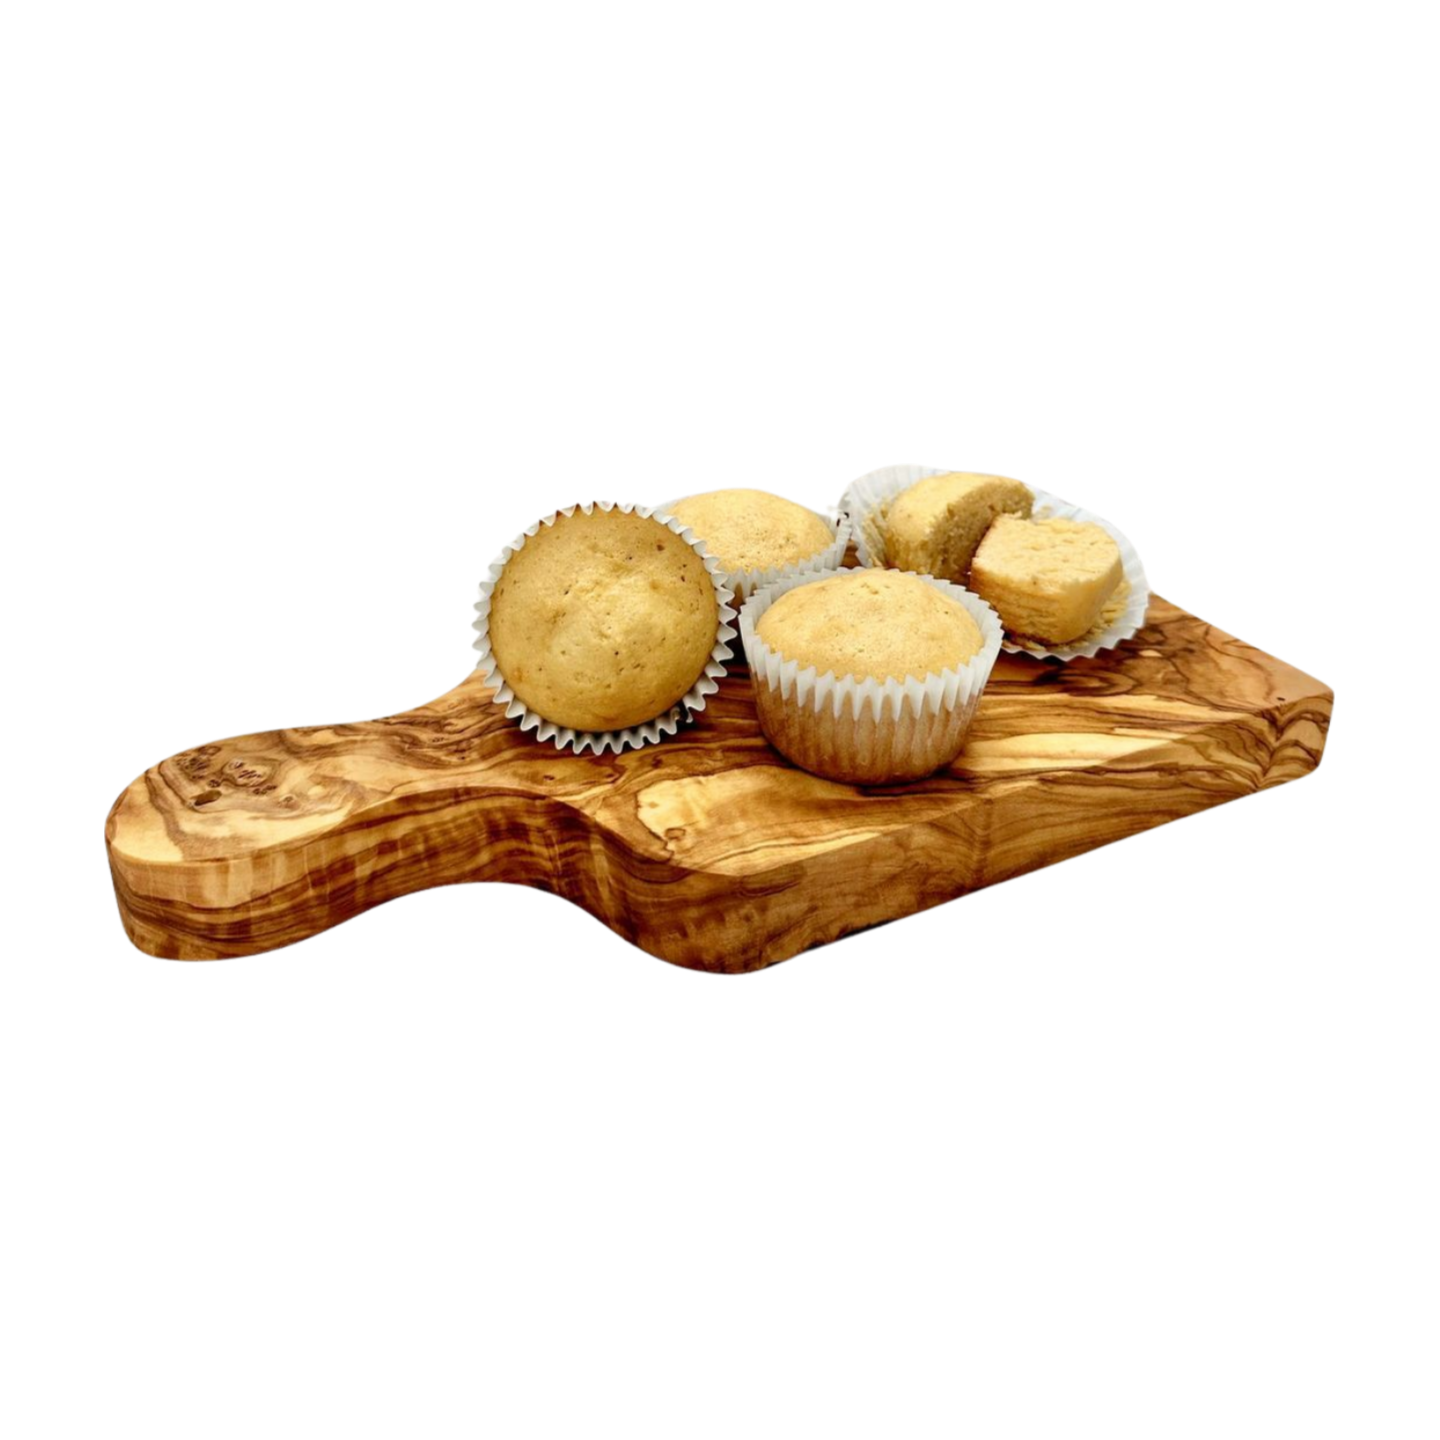 Small olive wood charcuterie board. Imported from Germany. Pictured here with muffins.